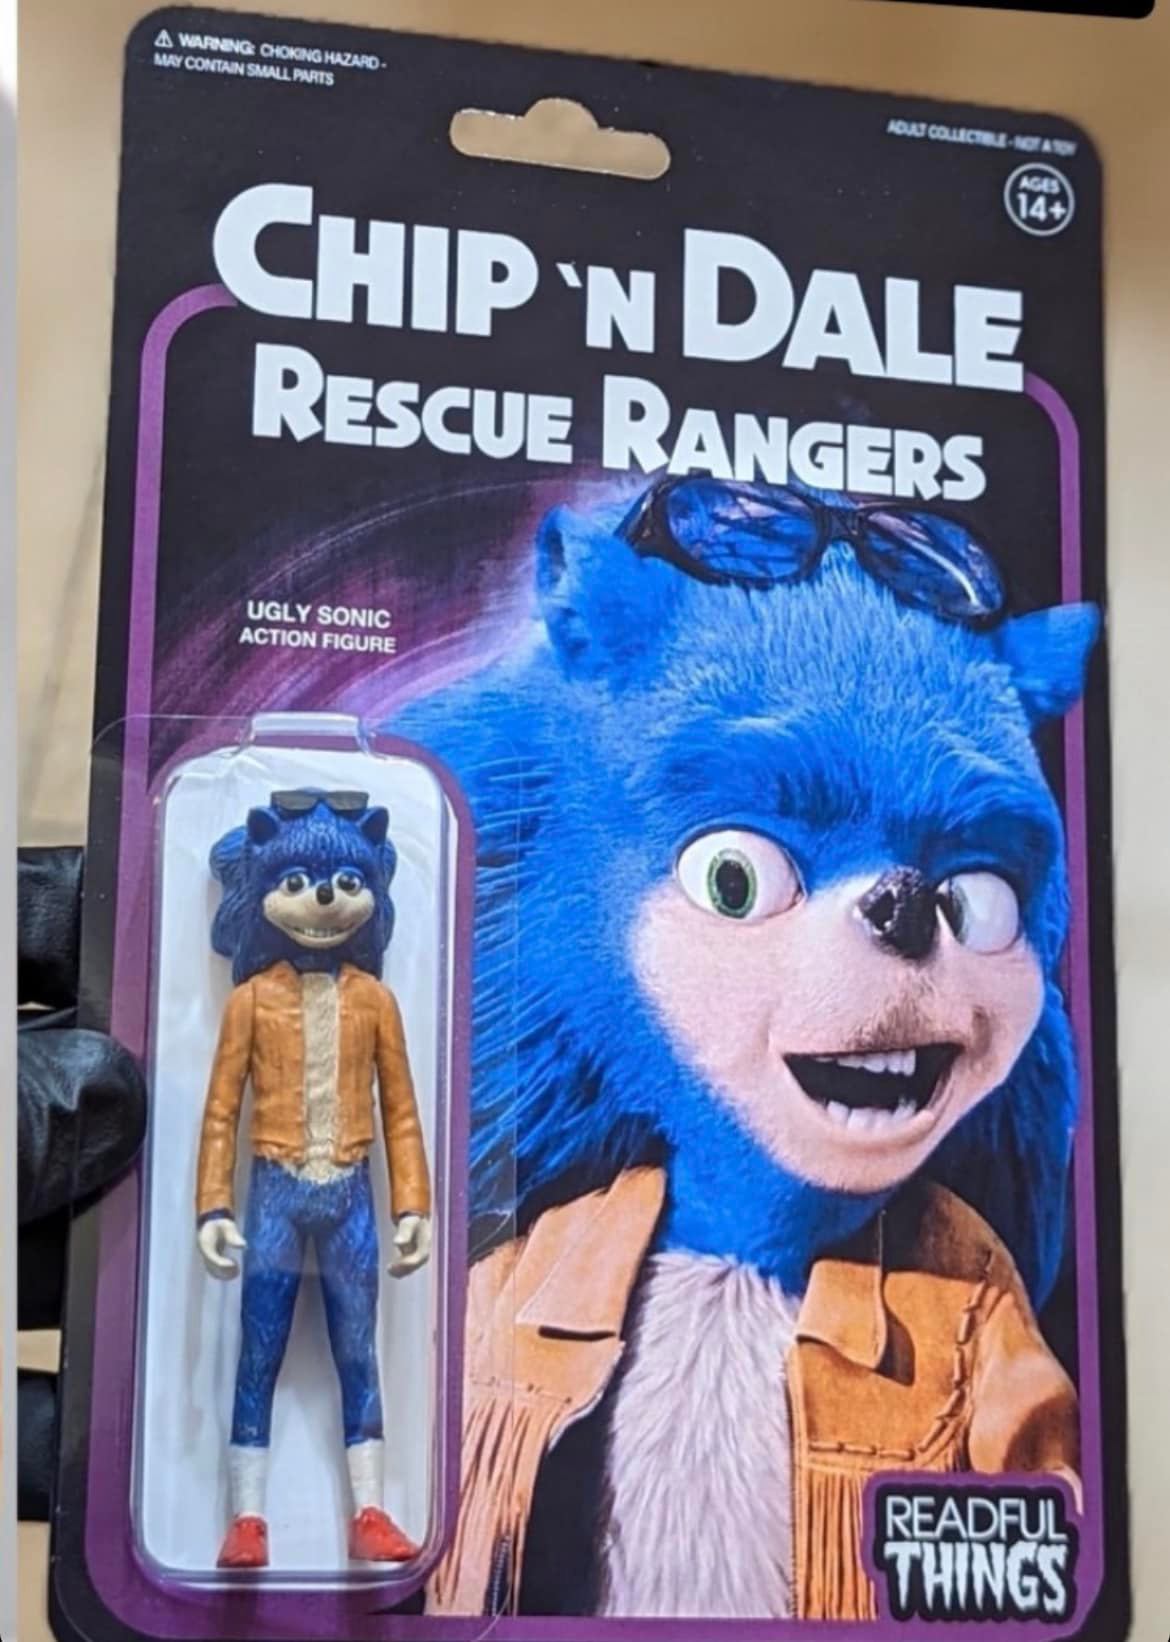 dank memes - action figure - Awarning Choking Hazard May Contain Small Parts Adat CollectibleNot Aton Ages 14 Chip 'N Dale Rescue Rangers Ugly Sonic Action Figure Readful Things